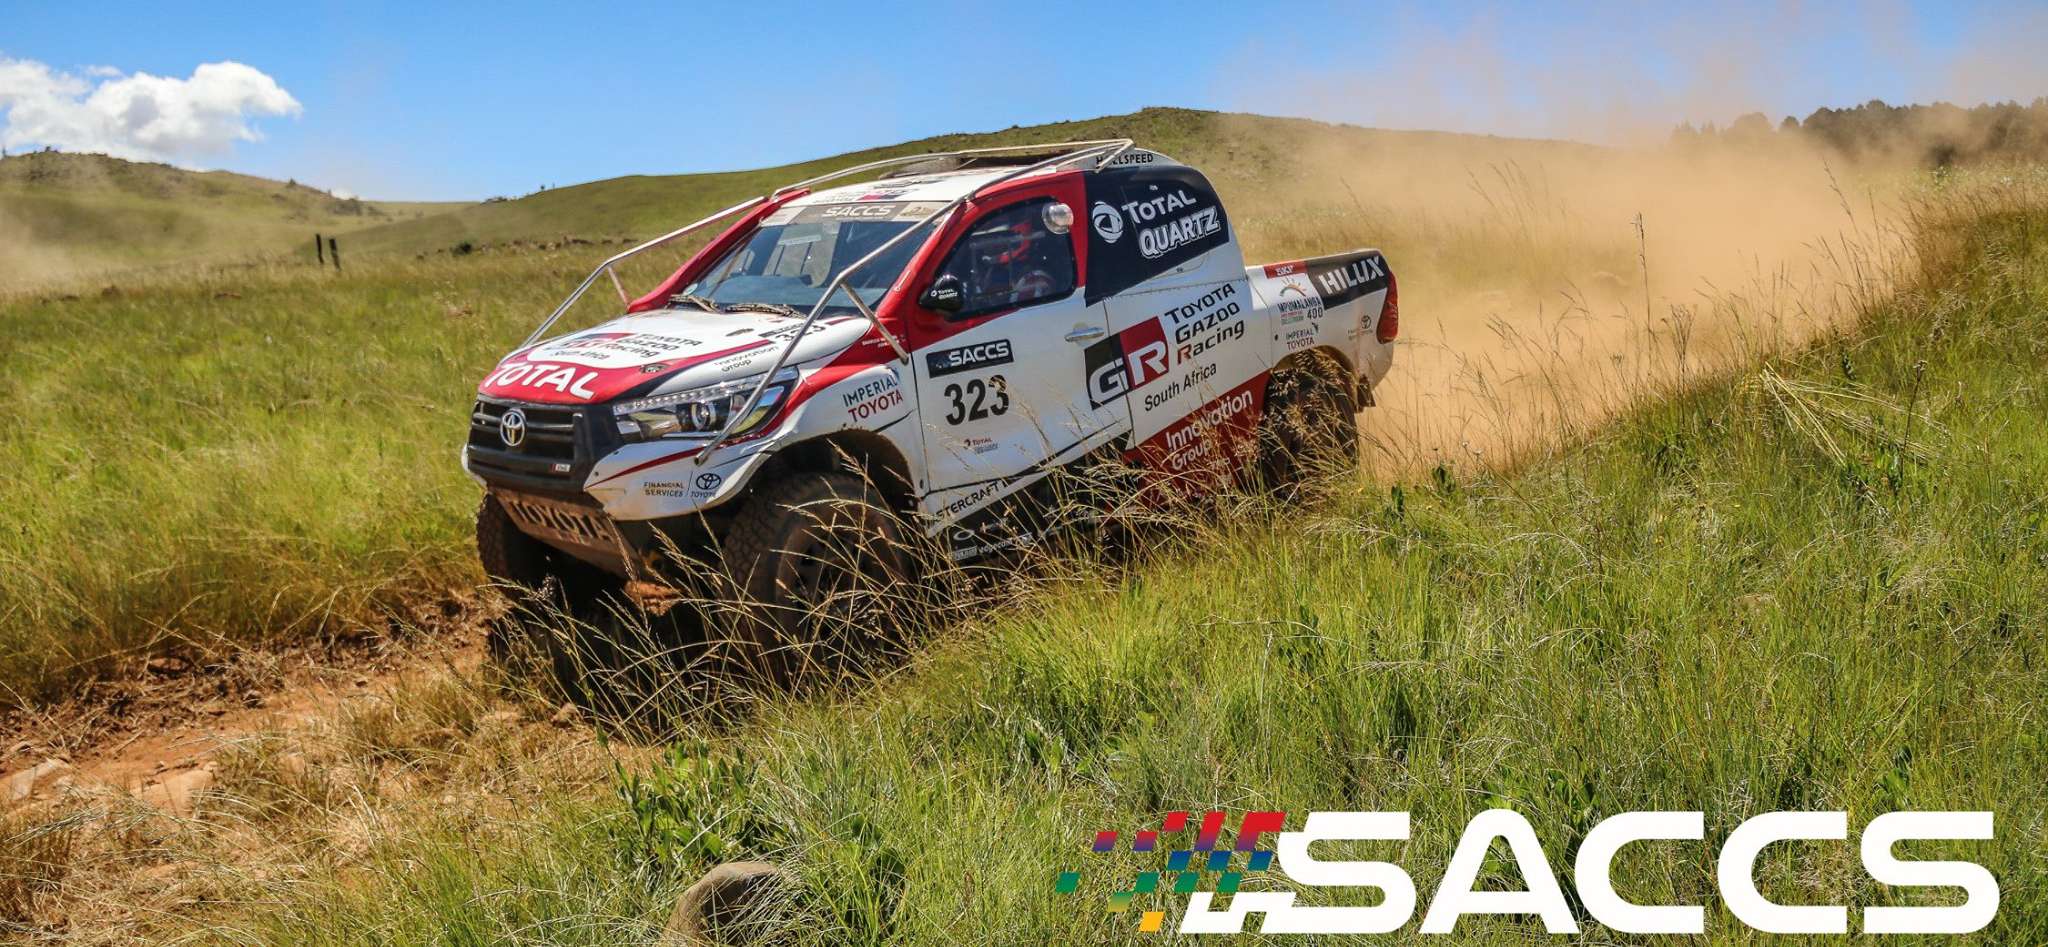  Toyota Desert Race 2019: Close championships and new terrain will make for exciting TDR 1000 in Botswana